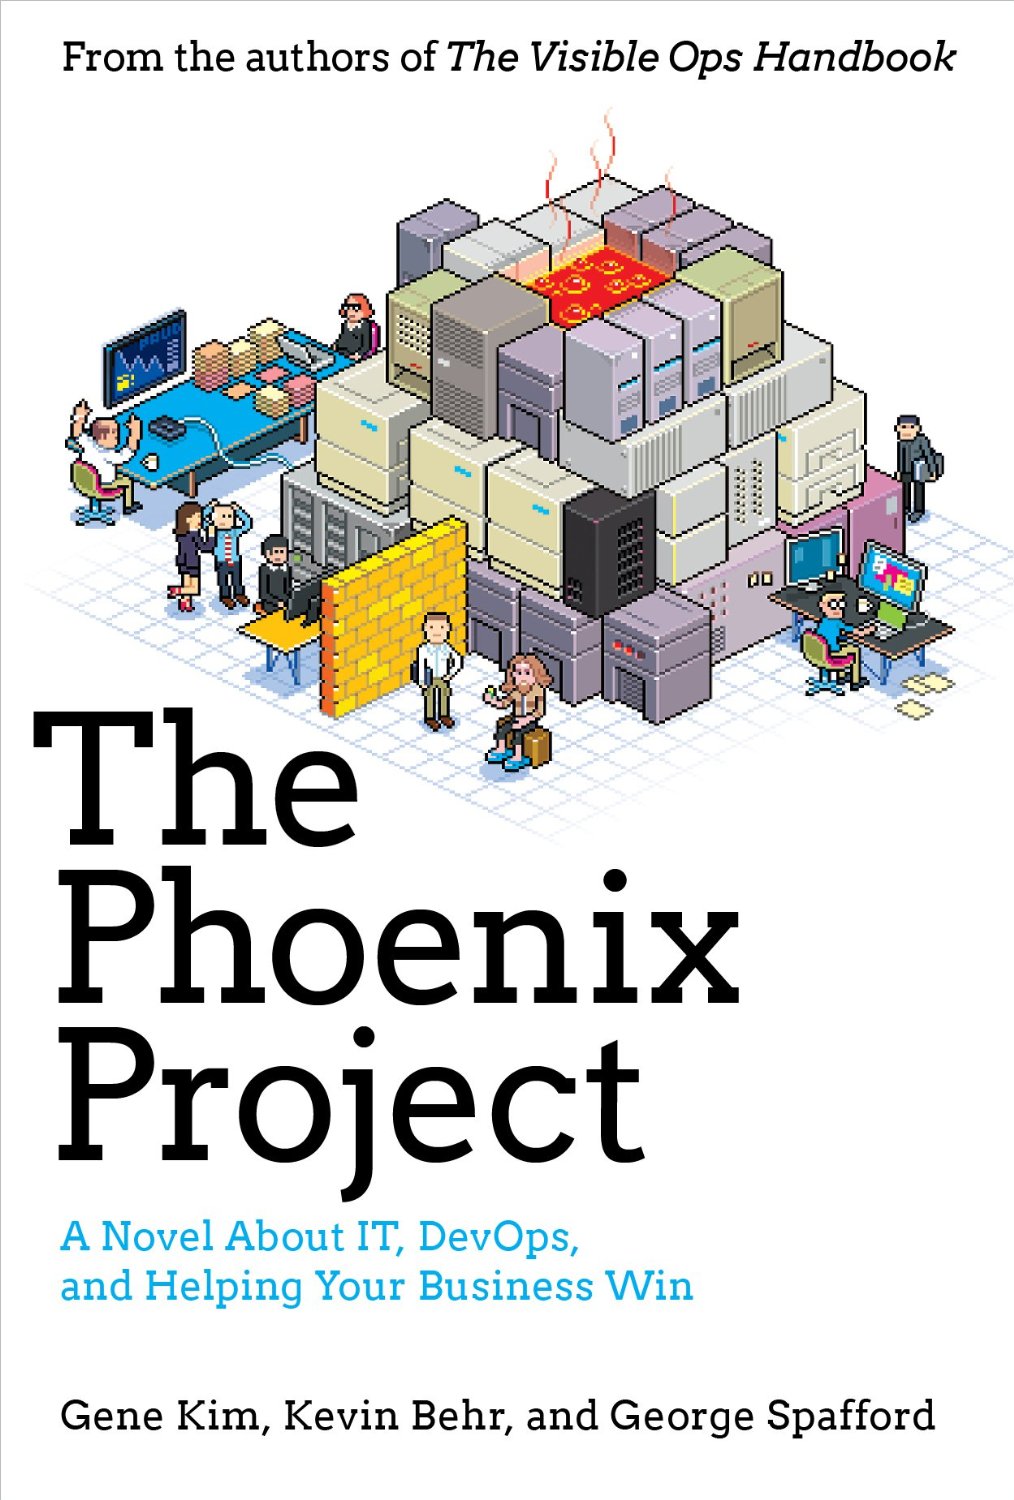 phoenix project book review